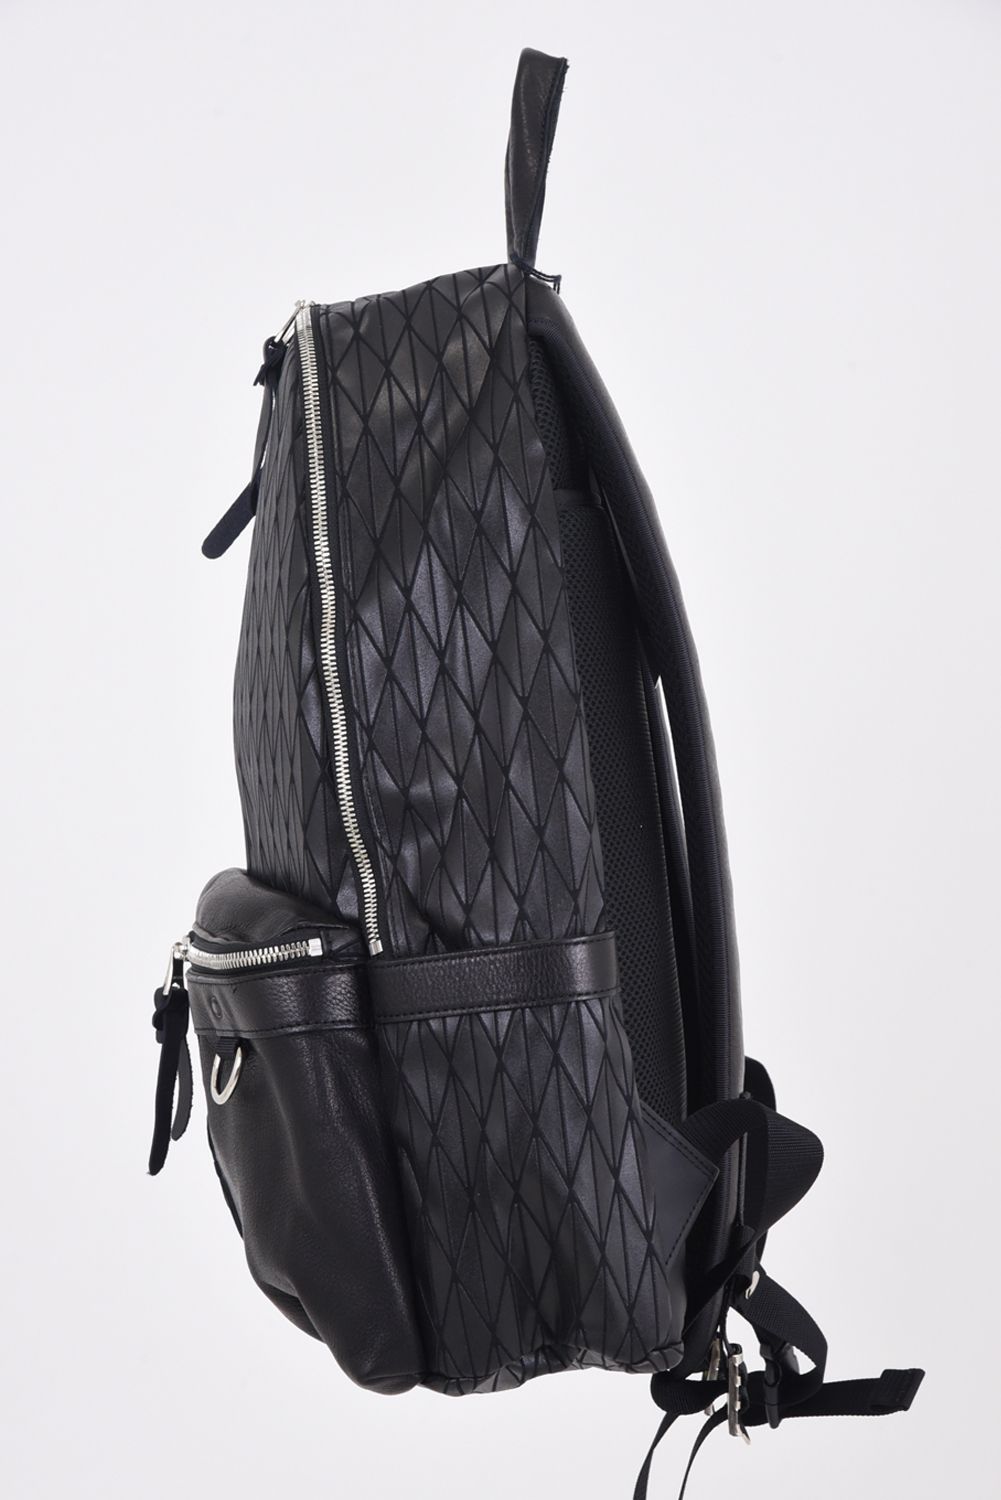 RESOUND CLOTHING - DECADE COLLABO BACK PACK / リ ...